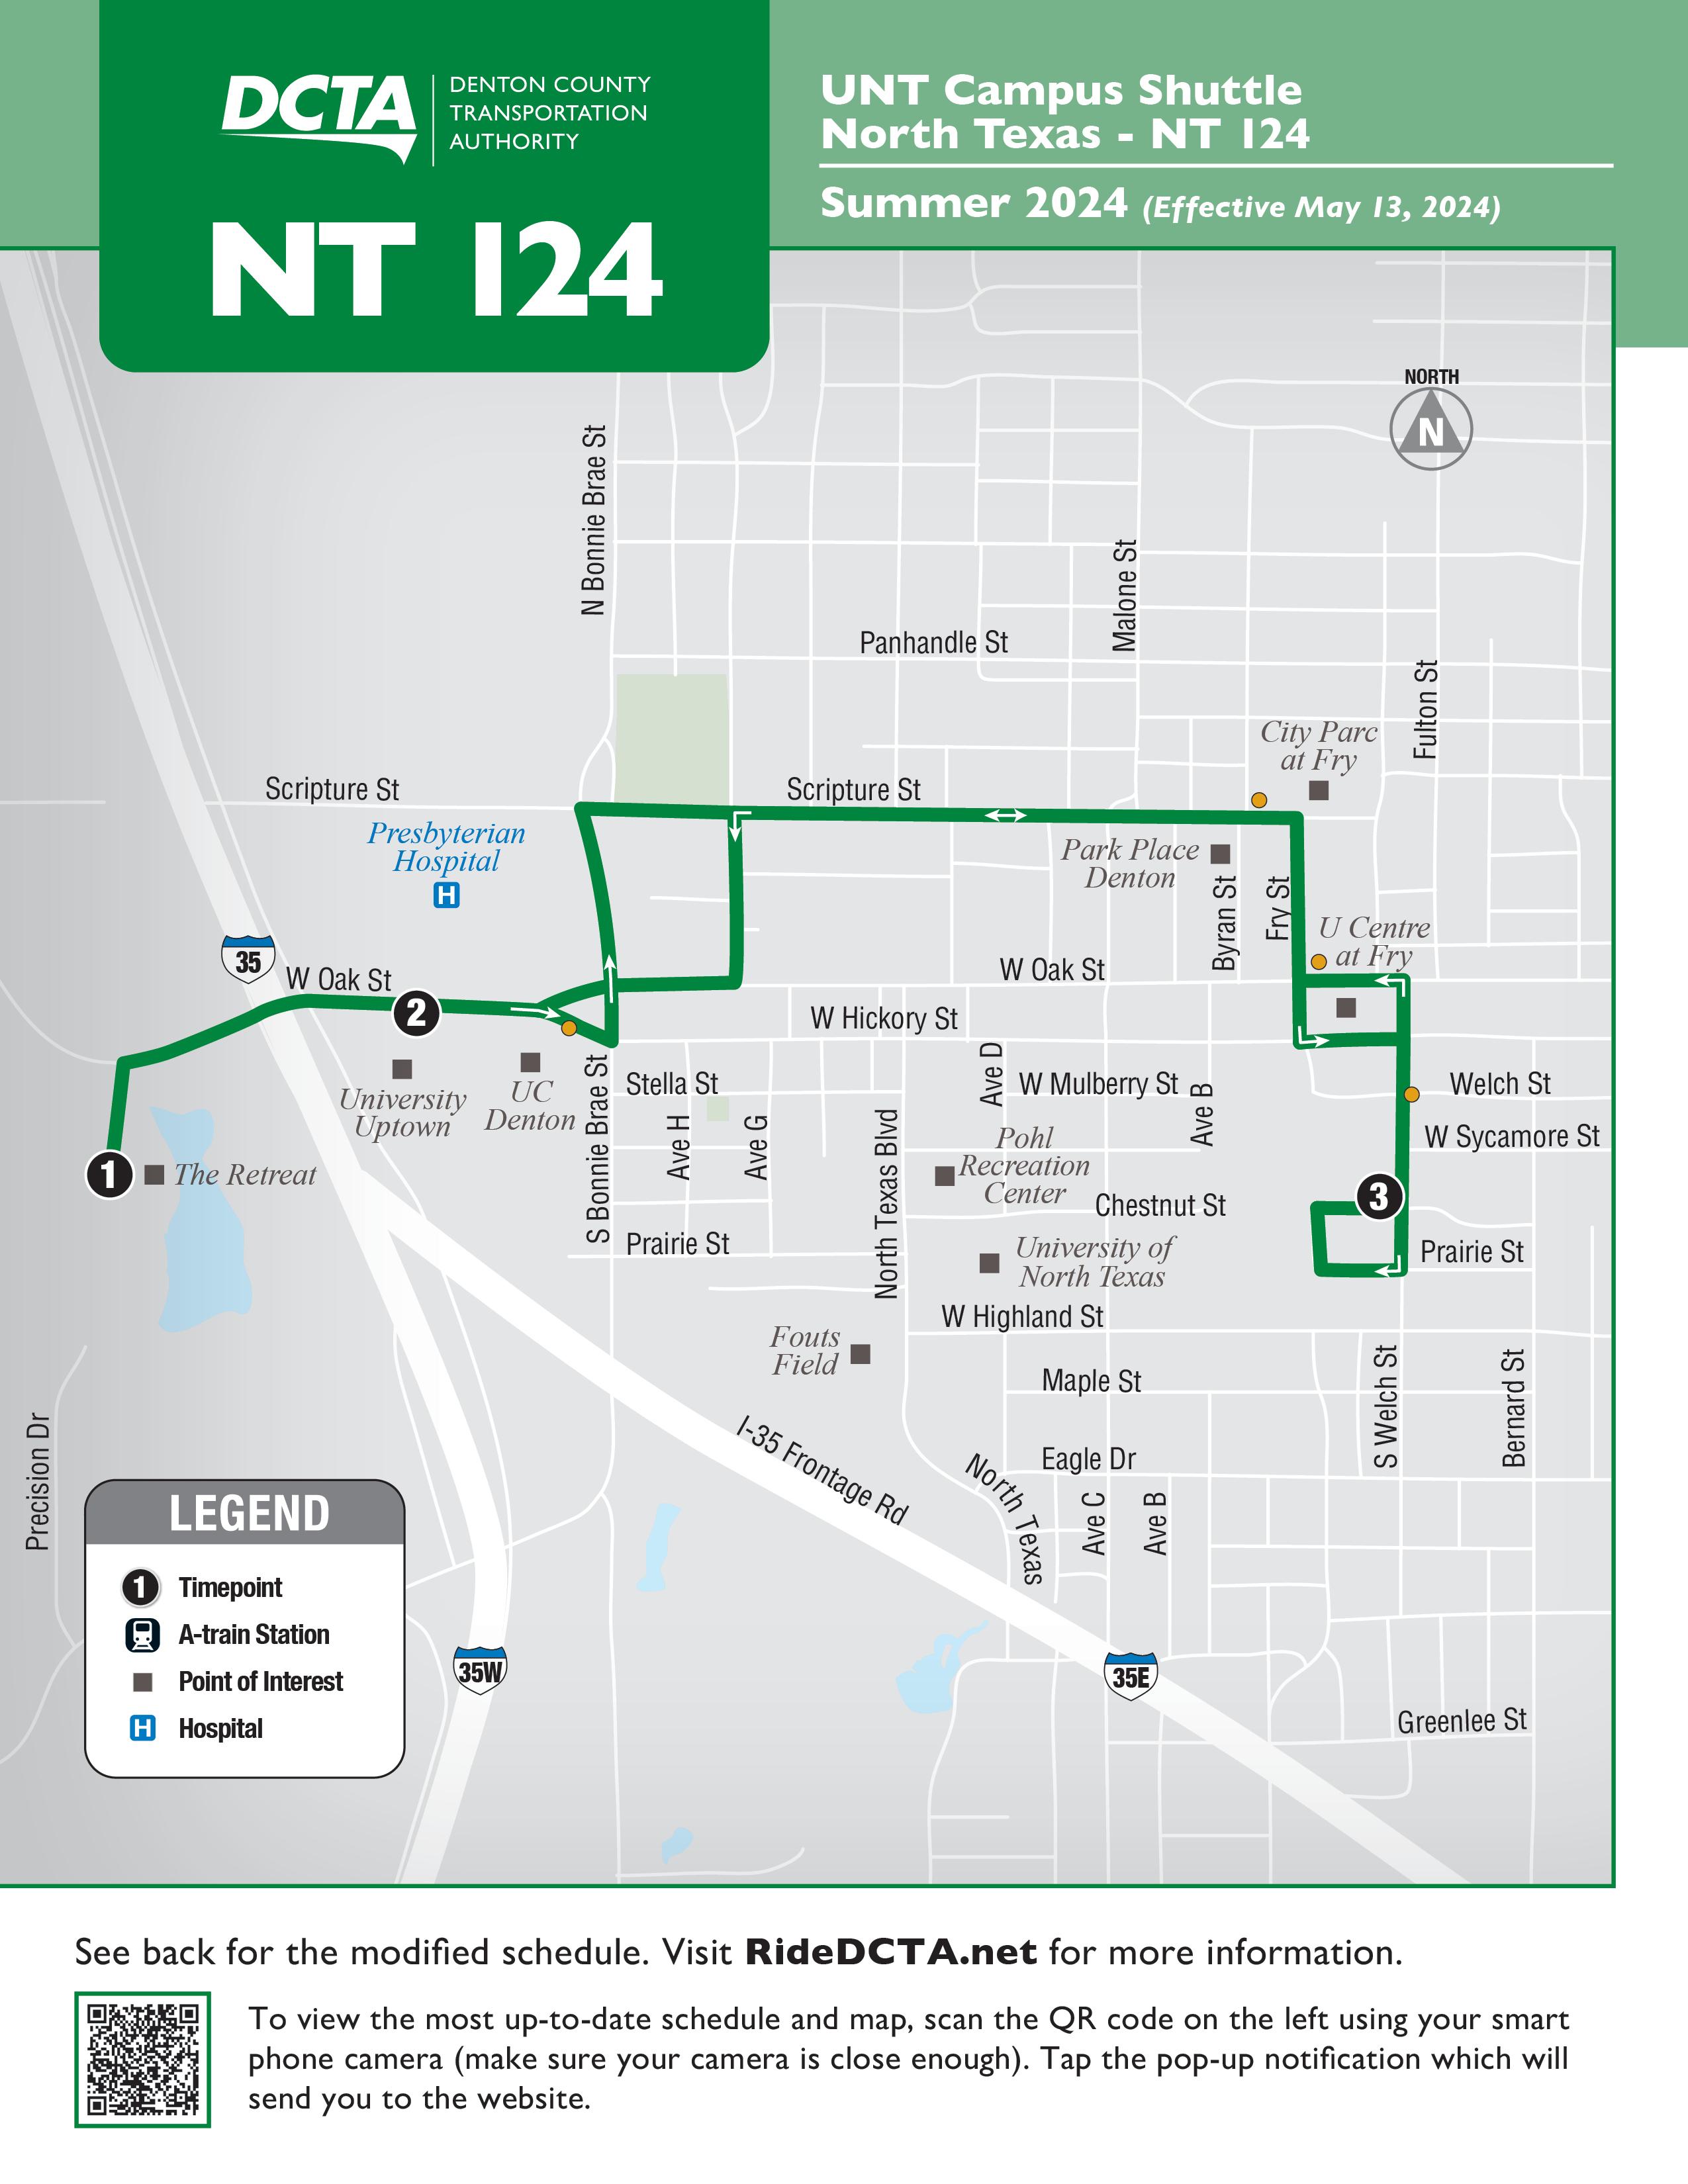 NT 124 Summer Route FY24 Map